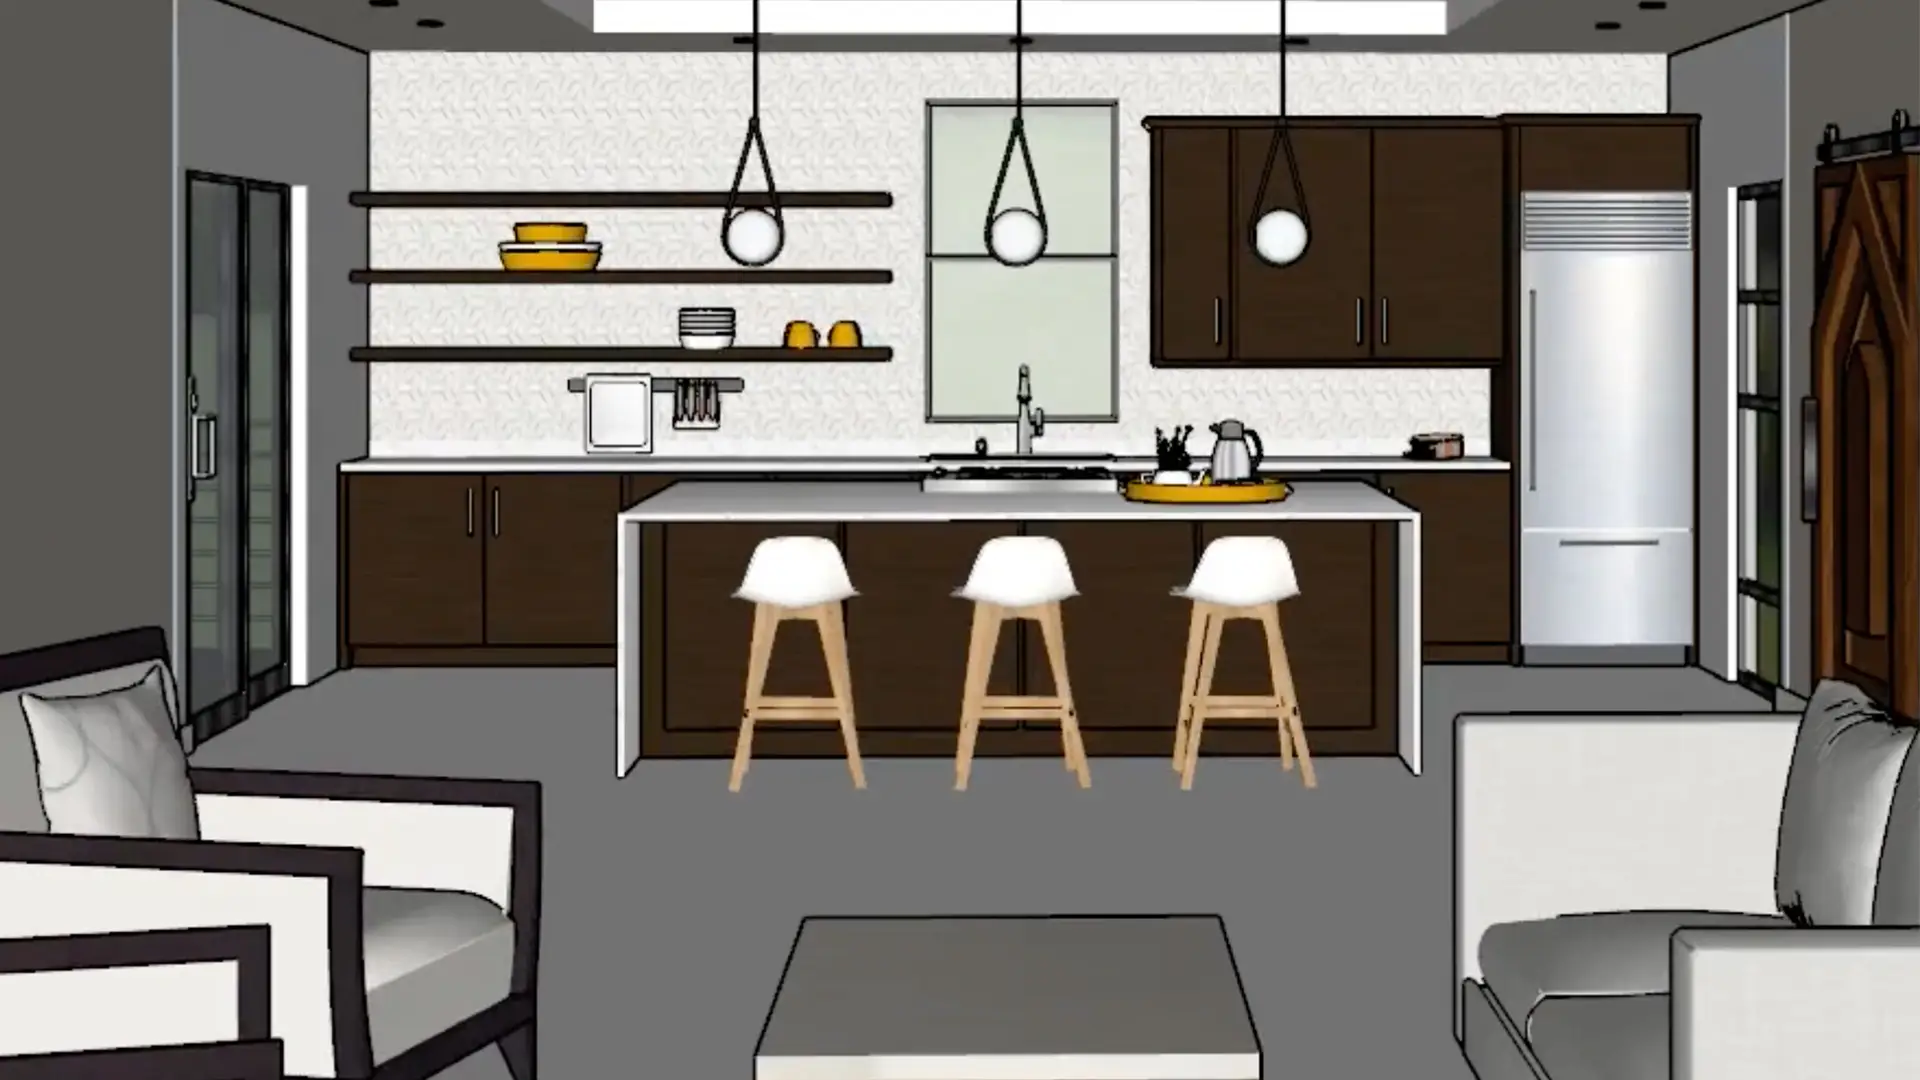 sketchup to design a kitchen